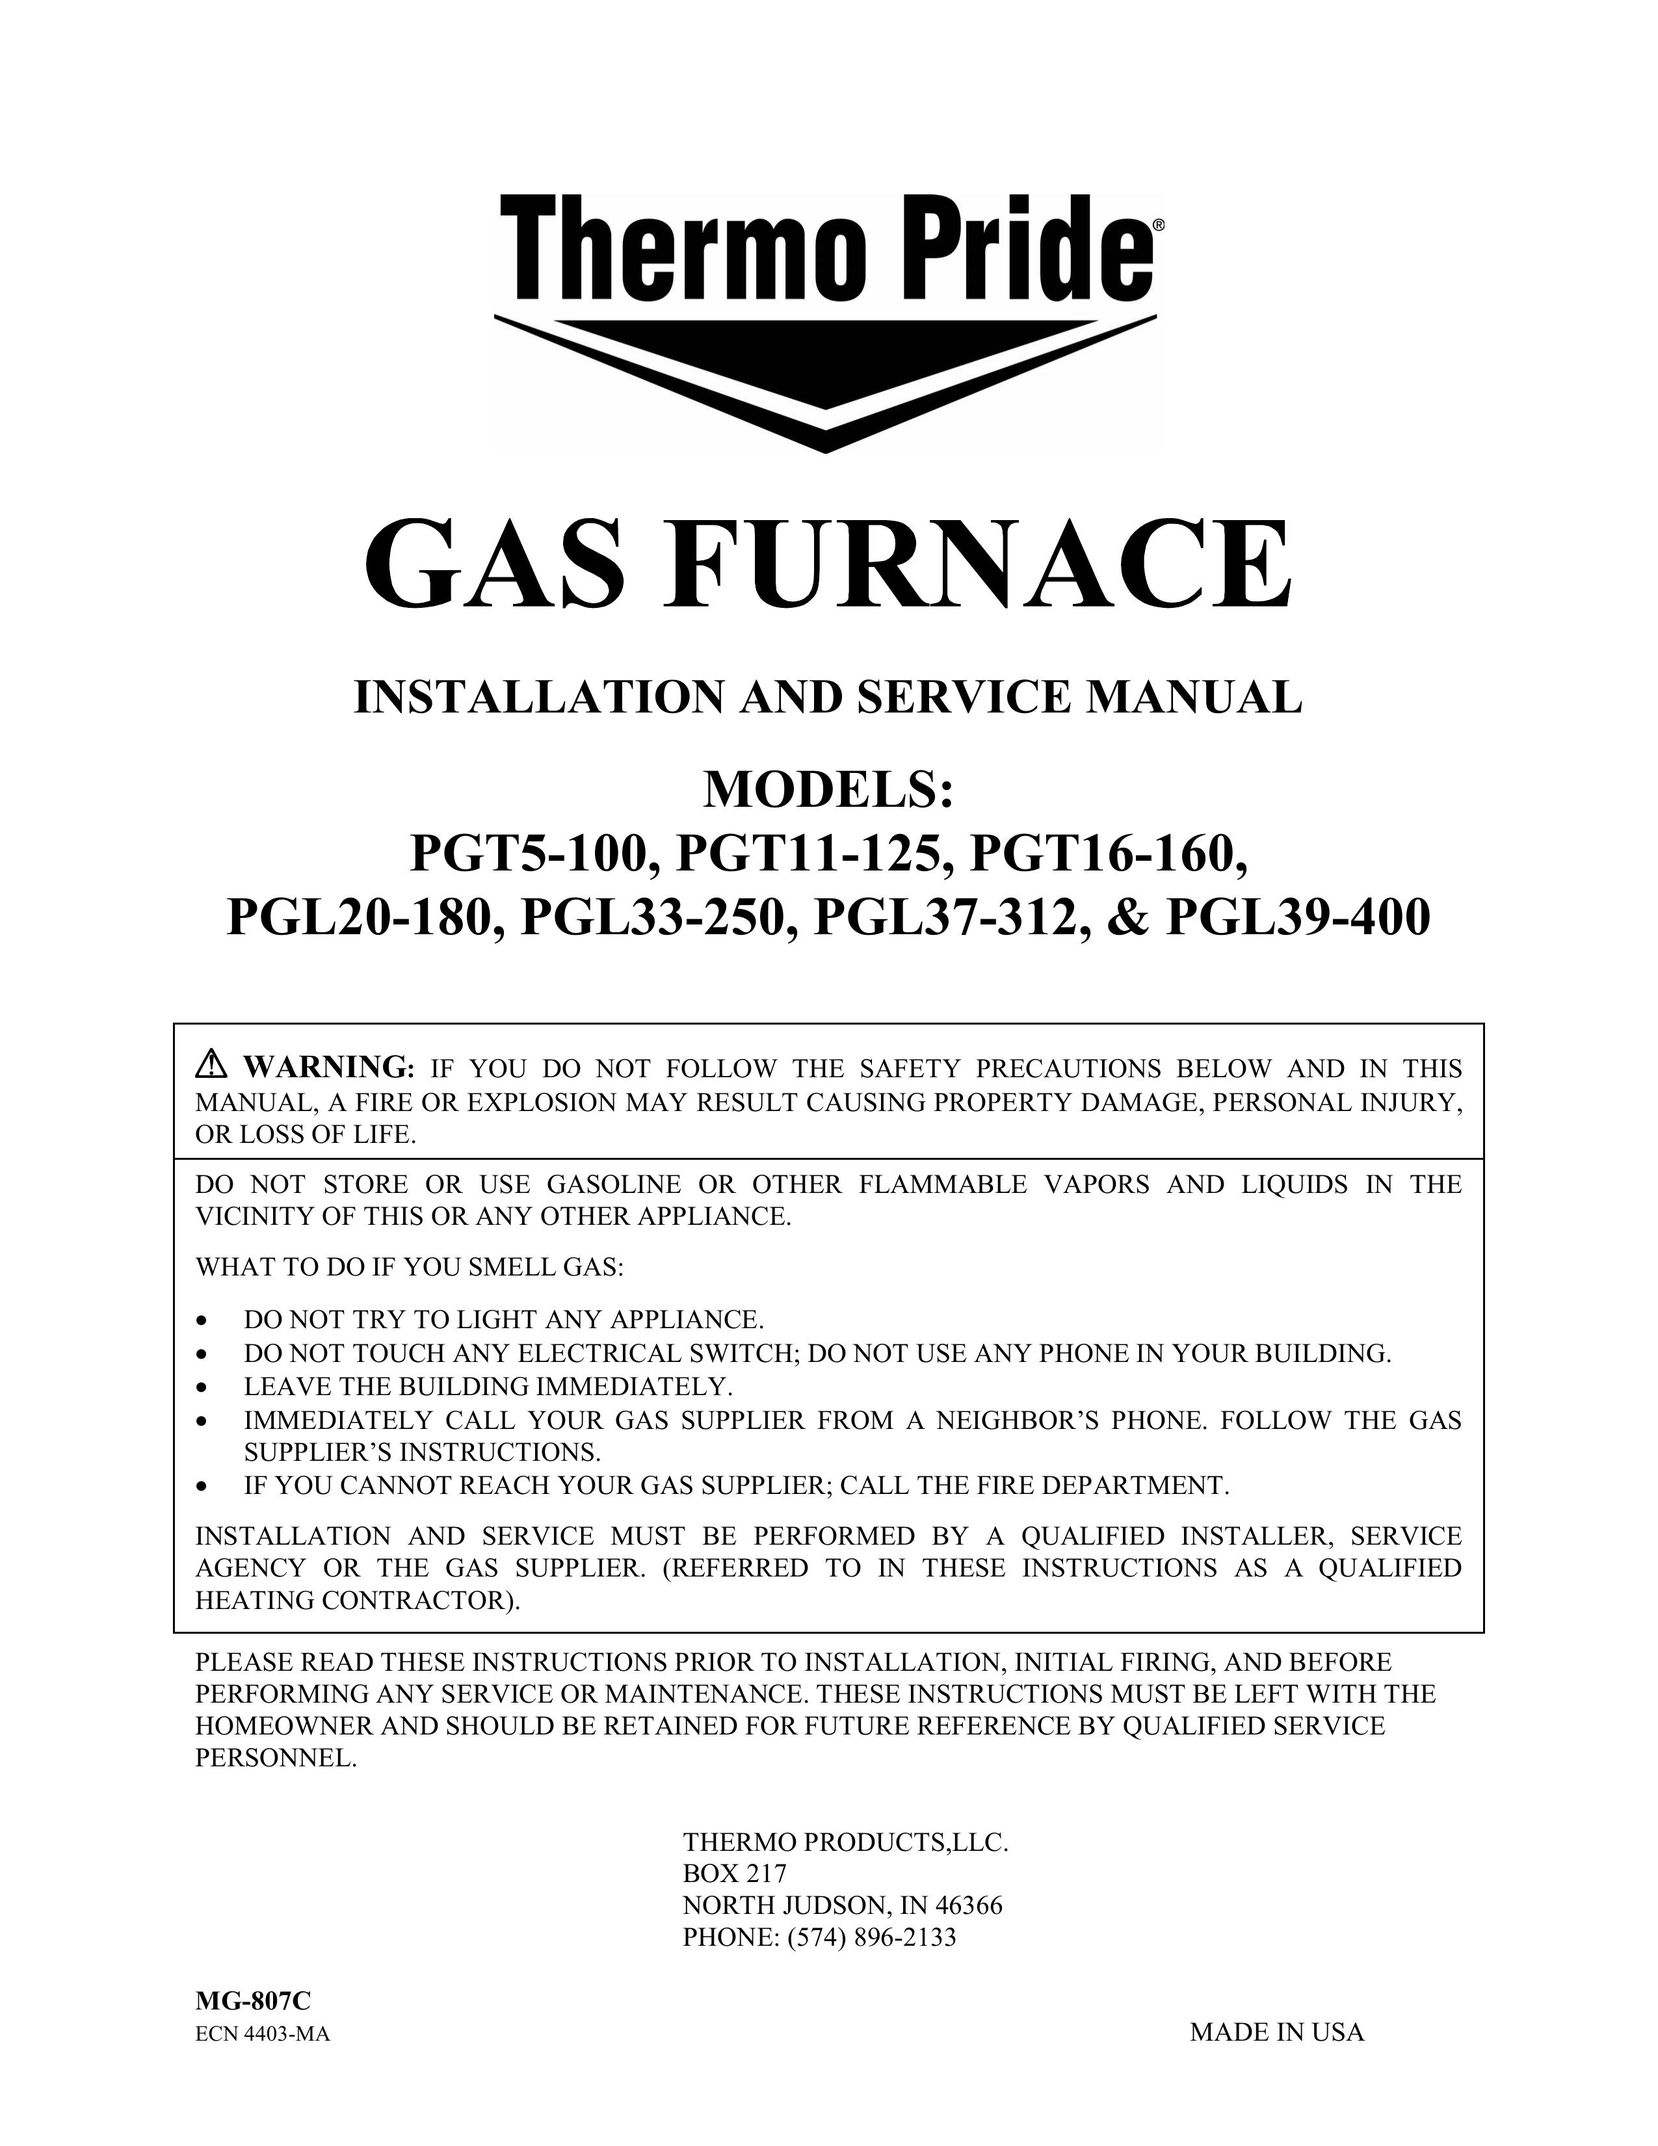 Thermo Products PGL33-250 Burner User Manual